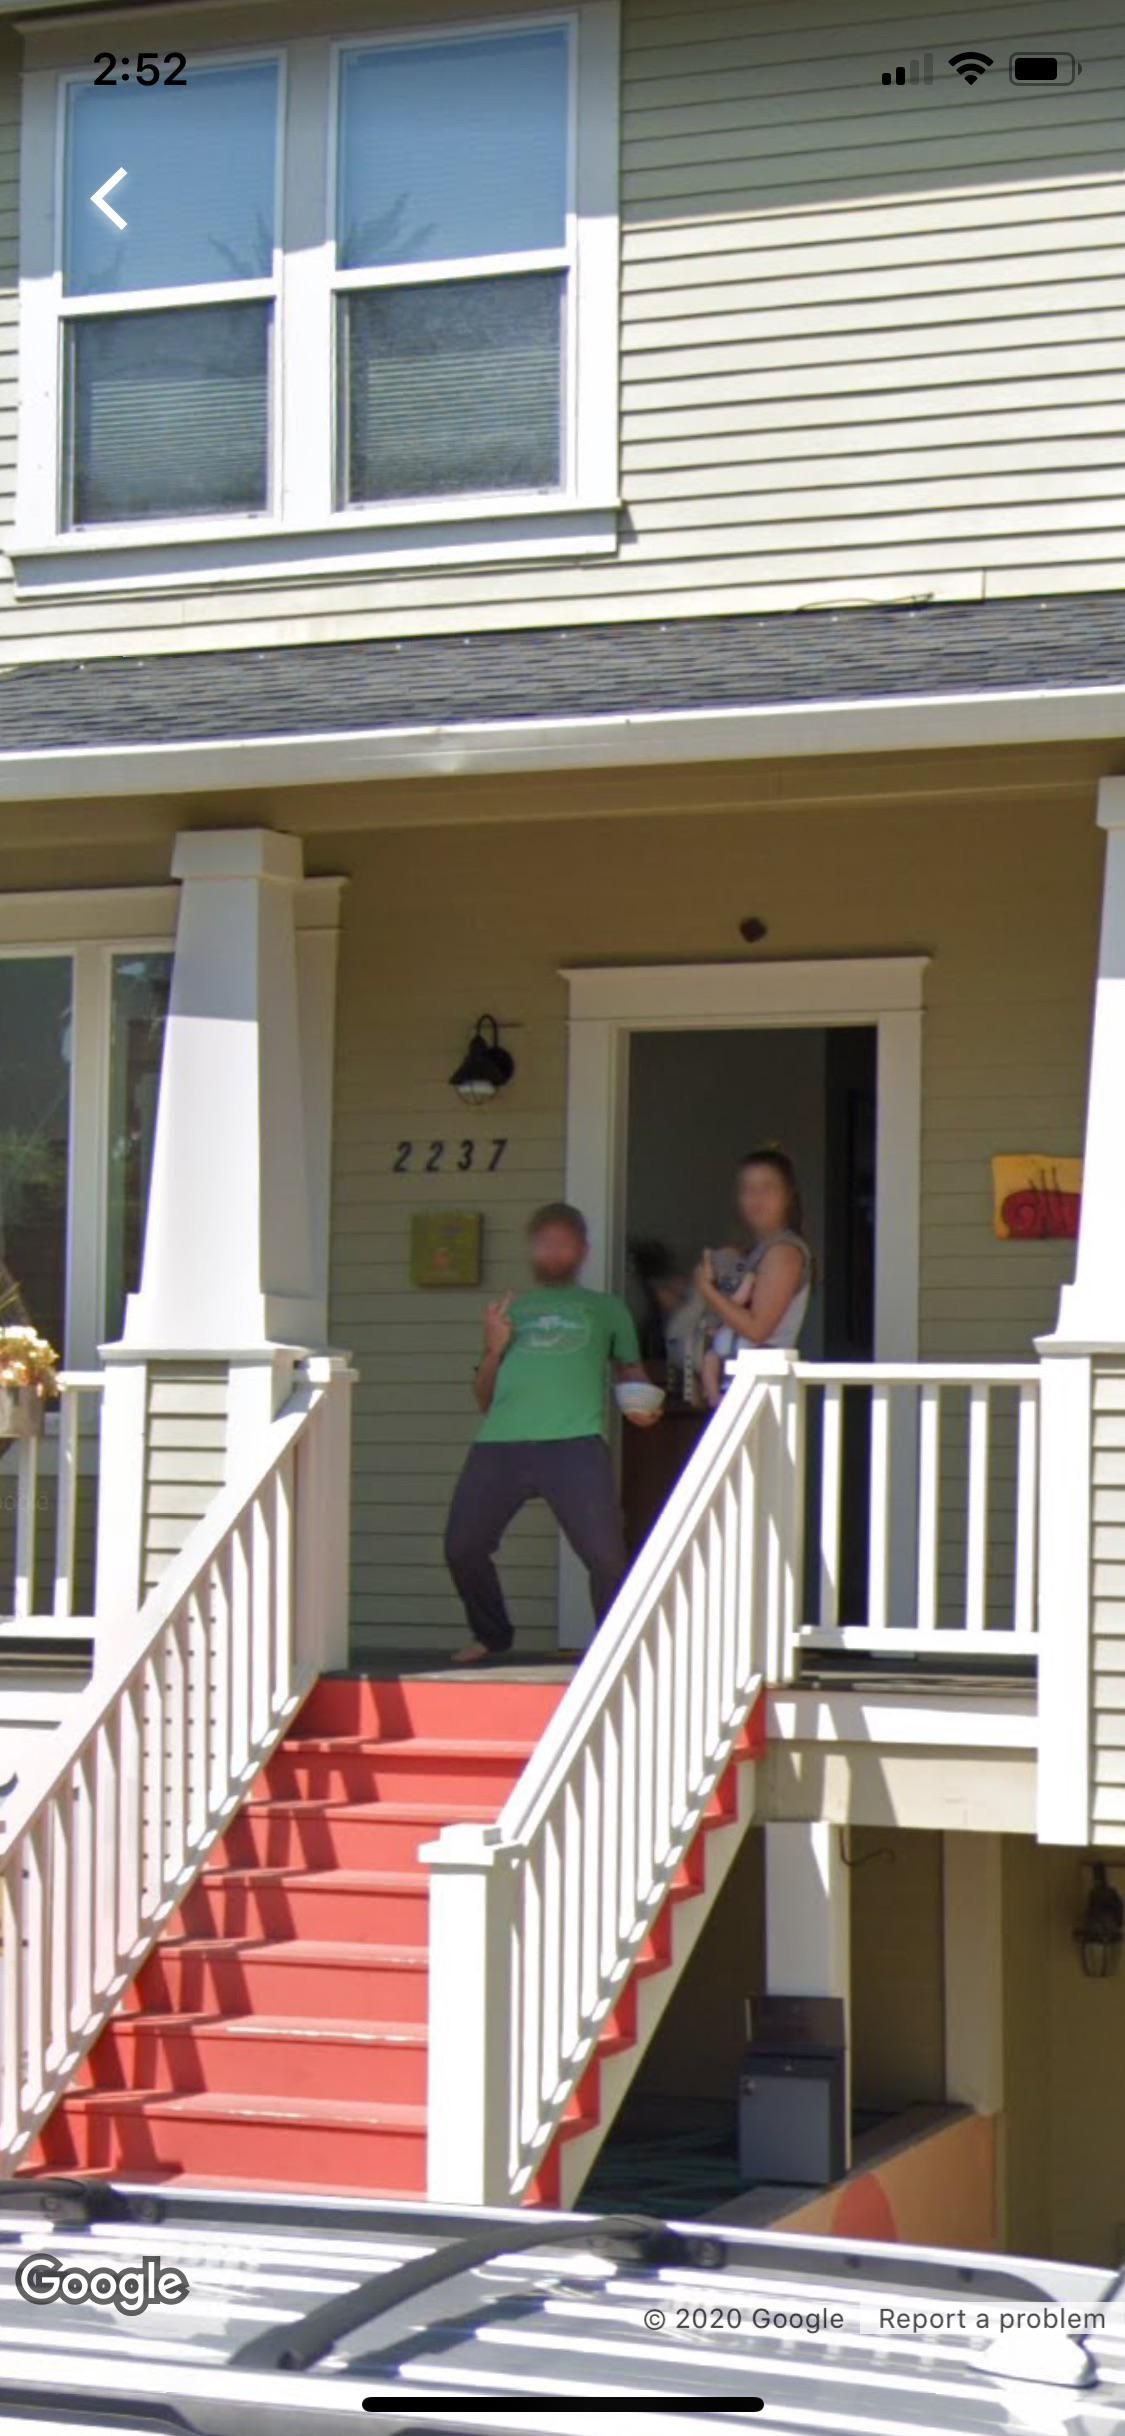 Google street view never disappoints.